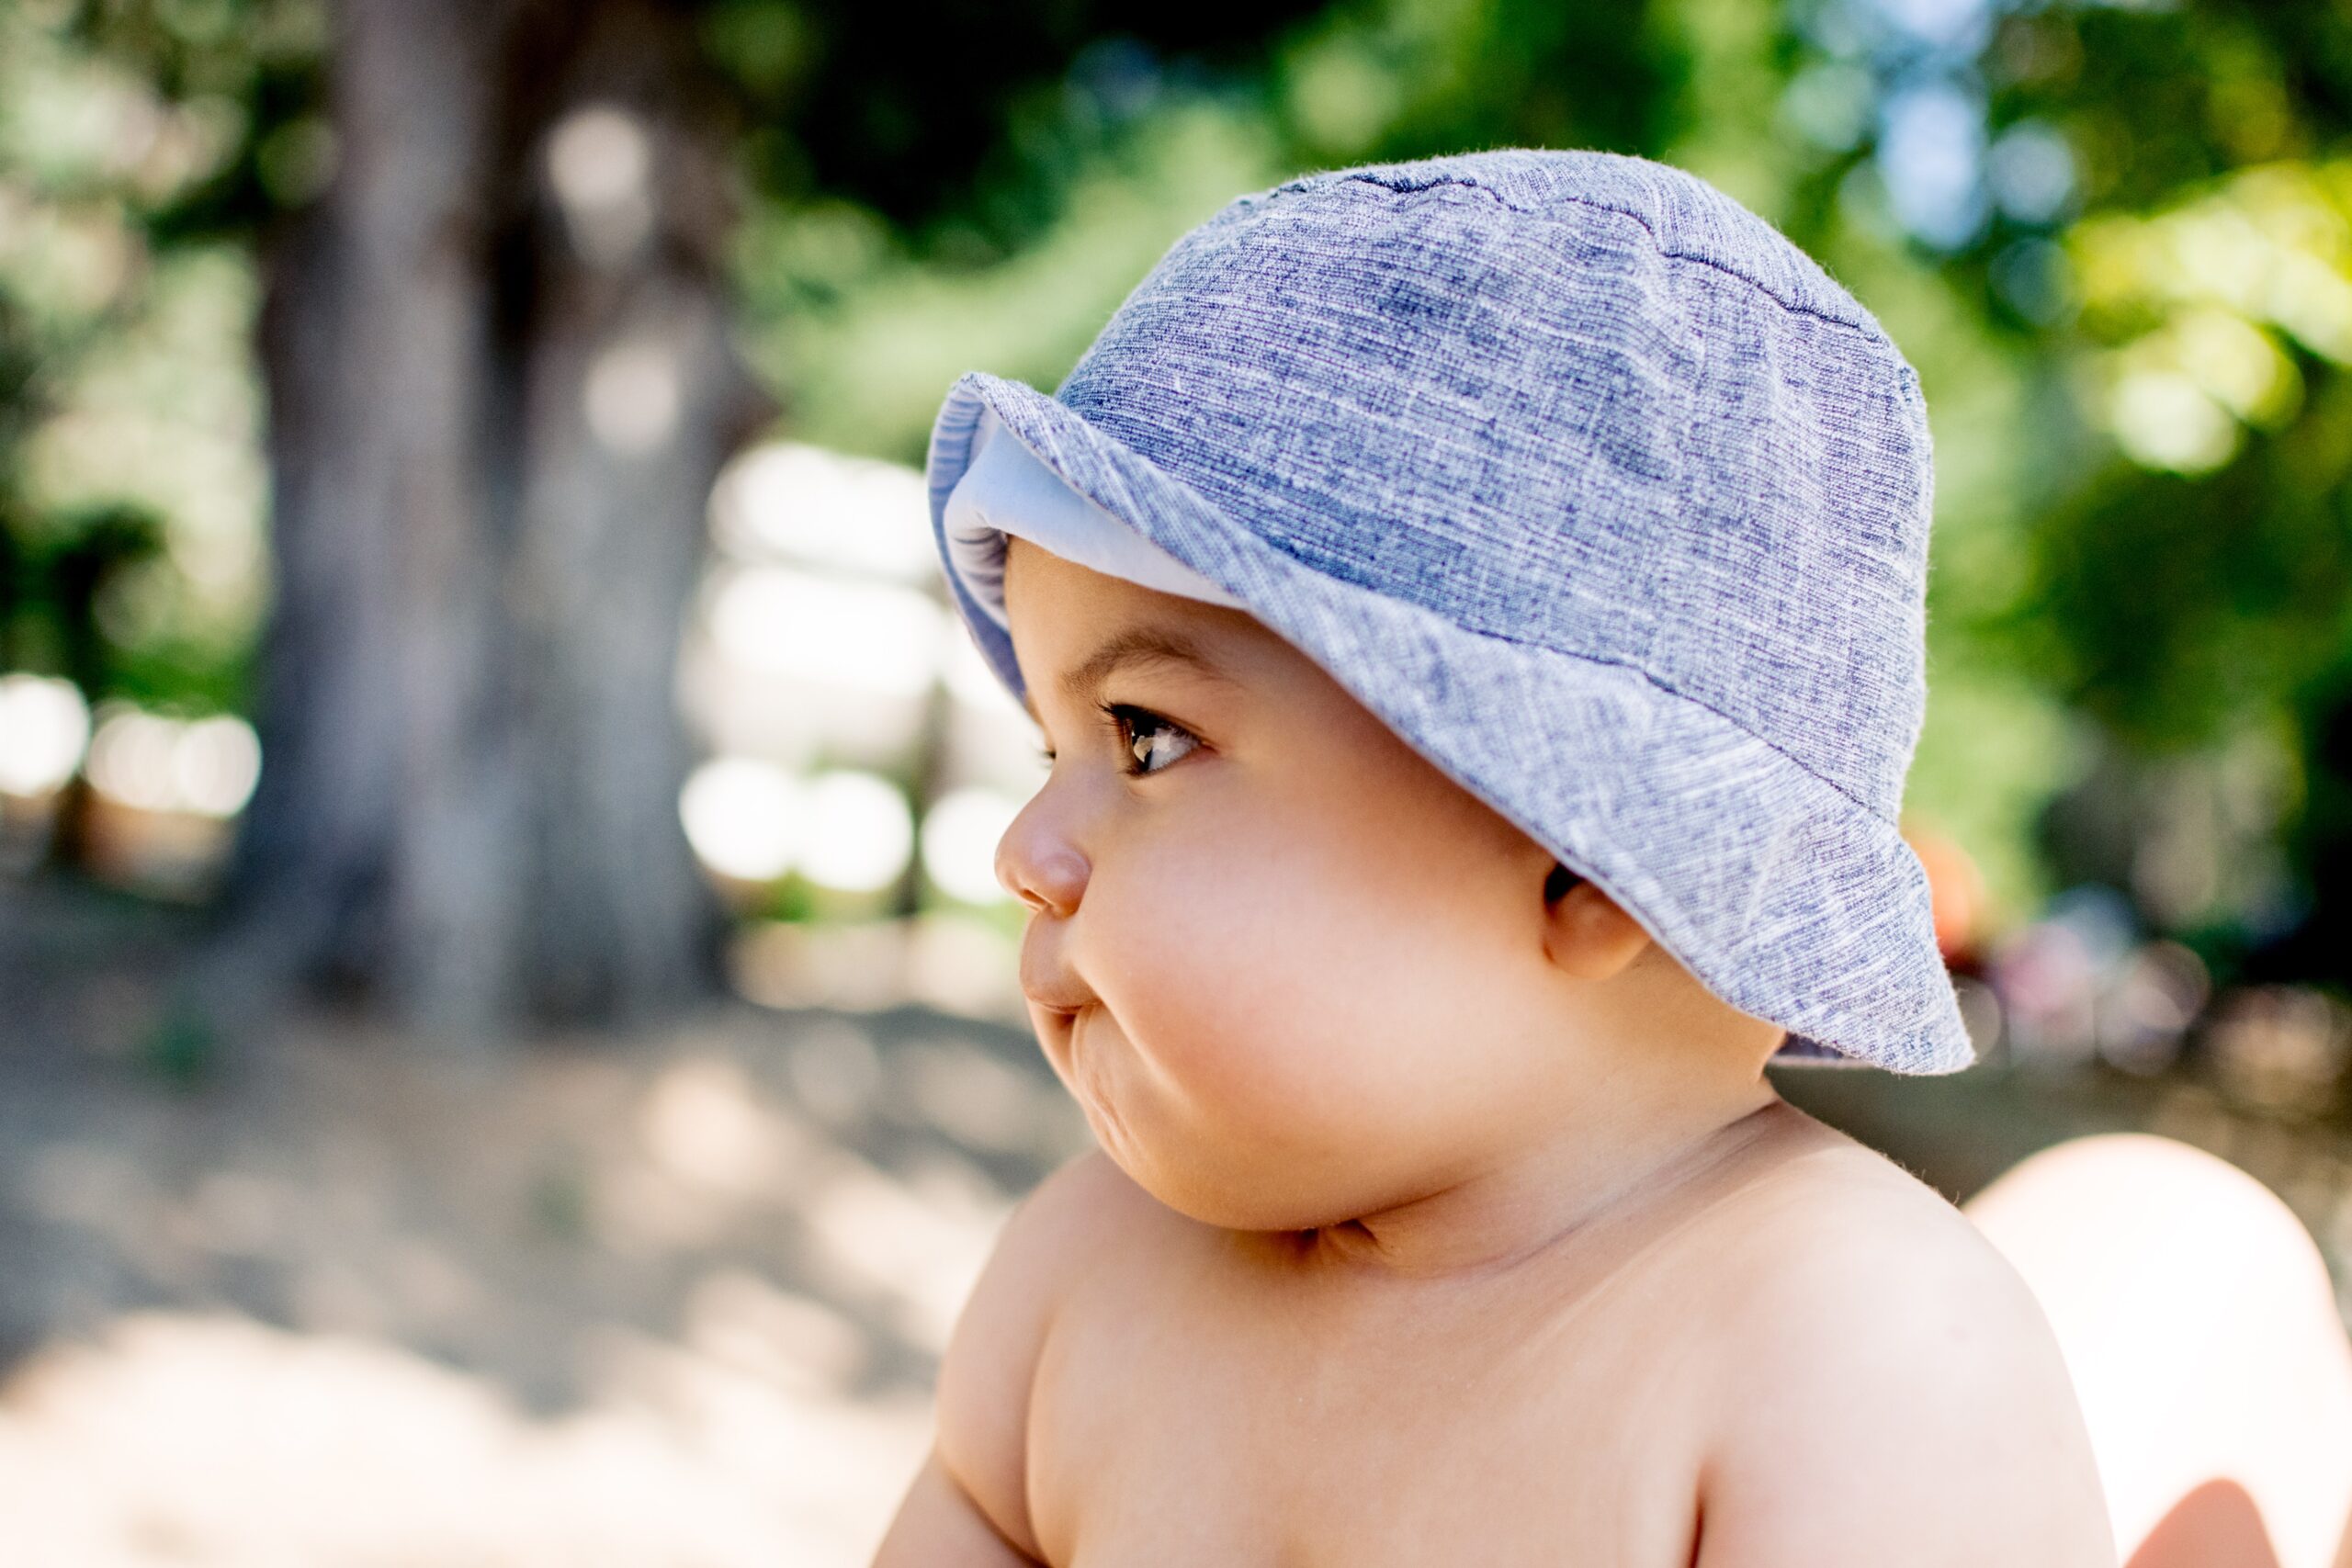 A baby wearing a hat